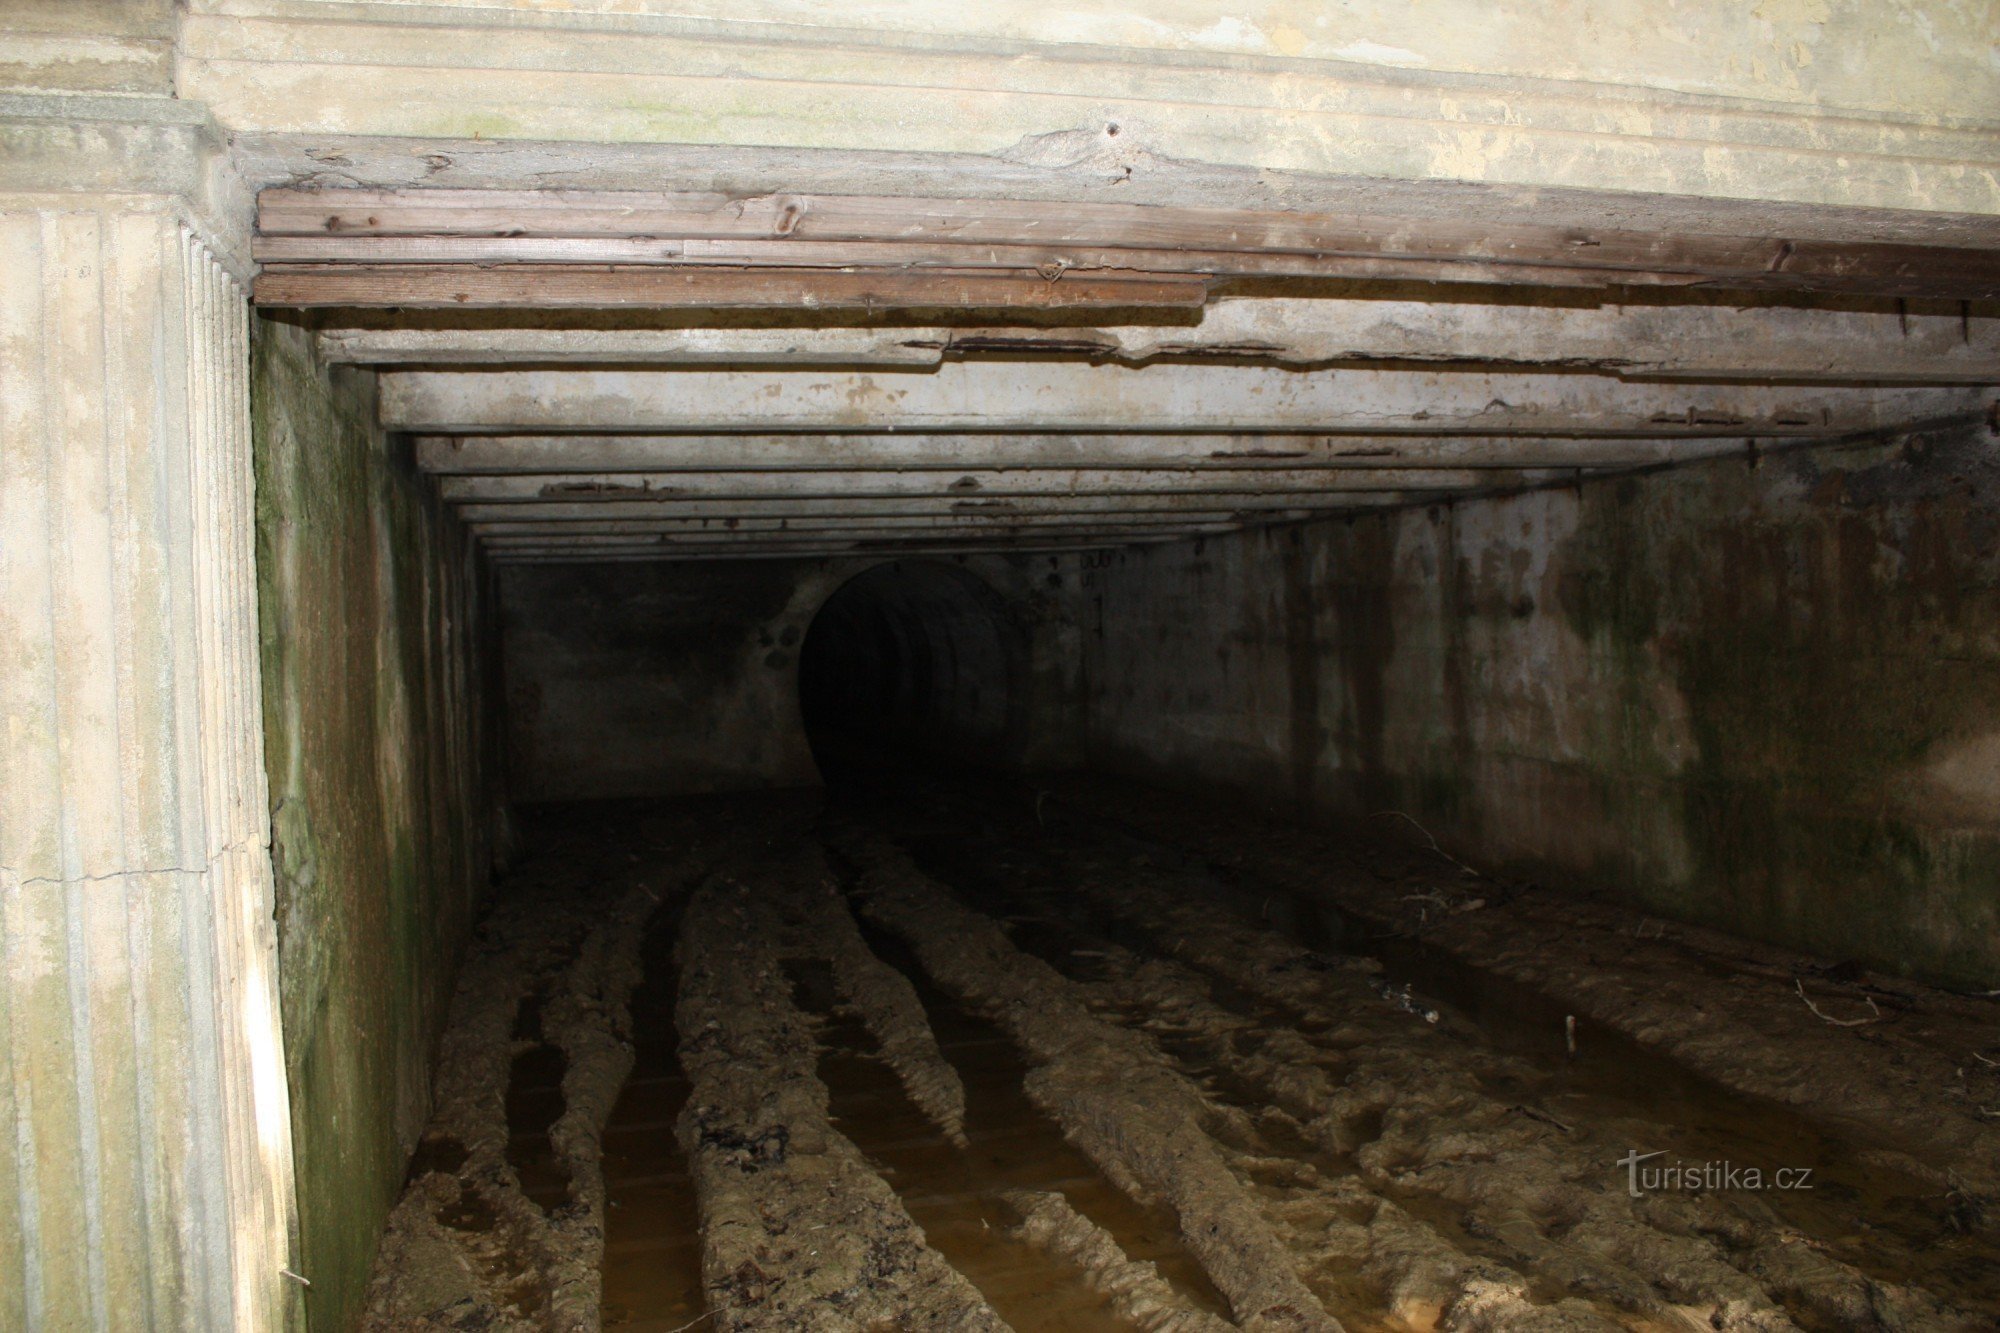 The entrance part of the narrow-gauge railway tunnel